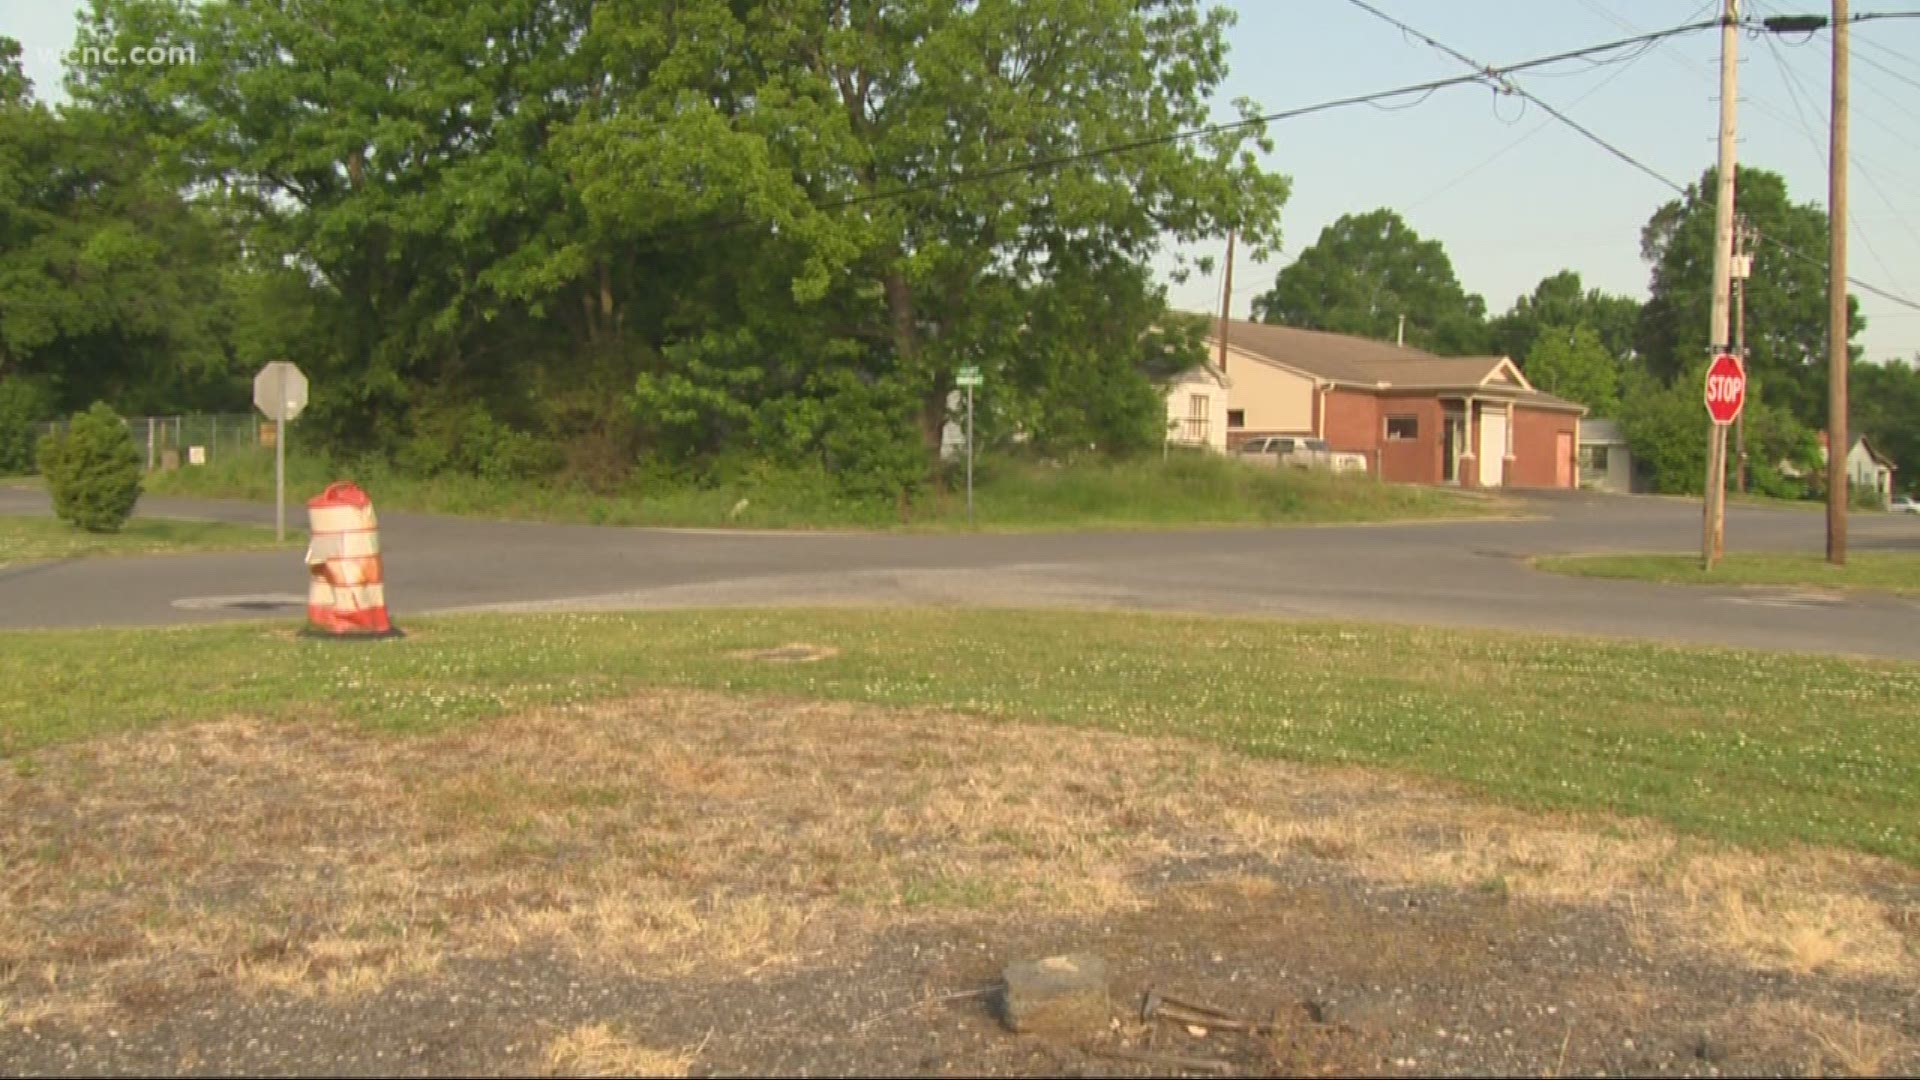 Deputies in Rock Hill are investigating after a woman was found shot to death Wednesday.